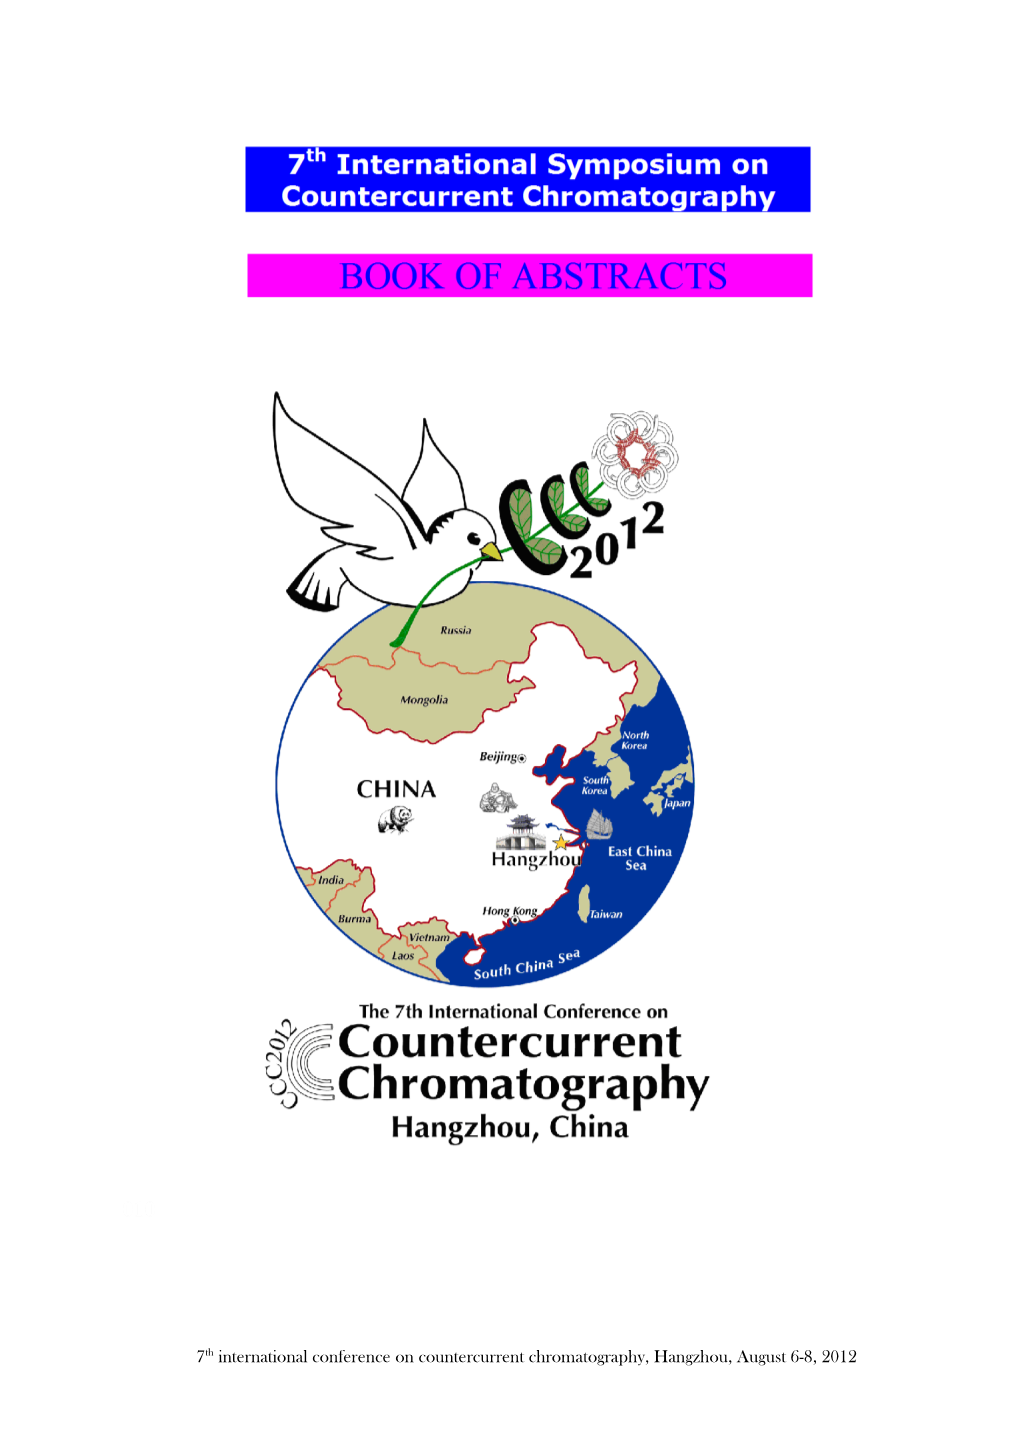 7Th International Conference on Countercurrent Chromatography, Hangzhou, August 6-8, 2012 Program